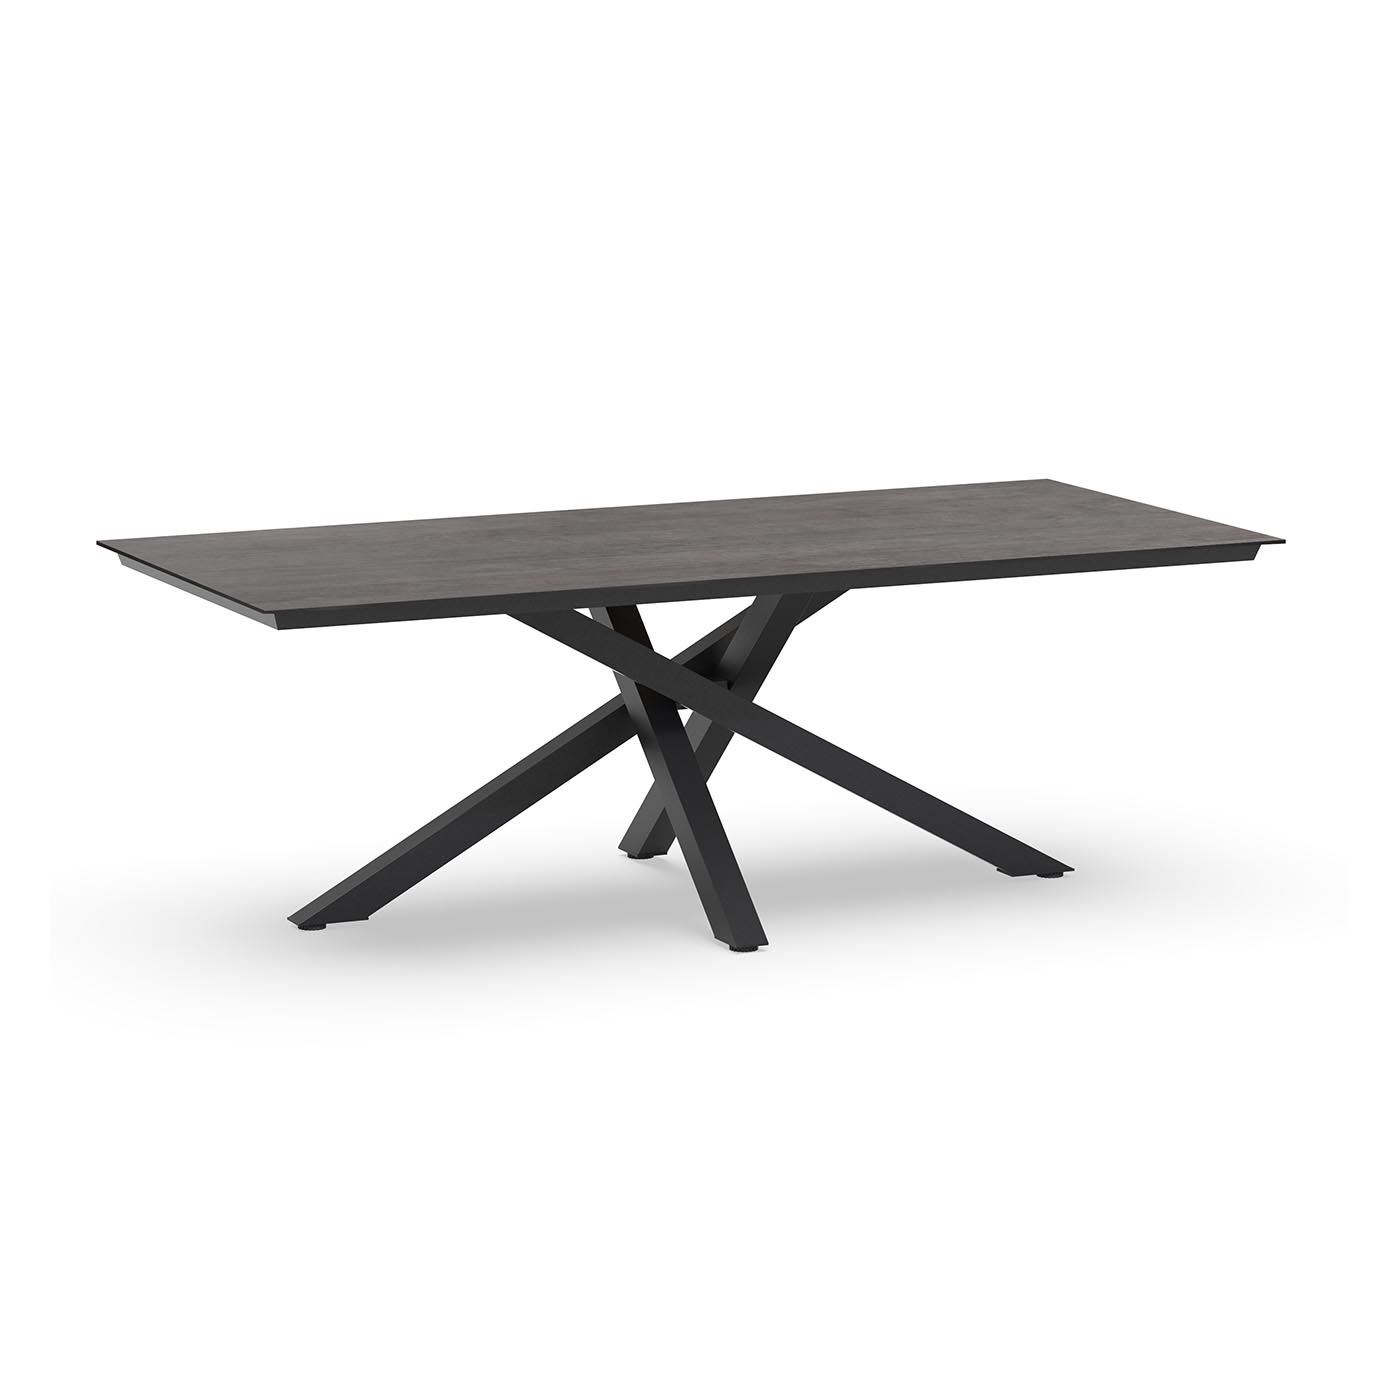 Orion Dining Table Trespa Forest Grey 220 x 100 cm Charcoal